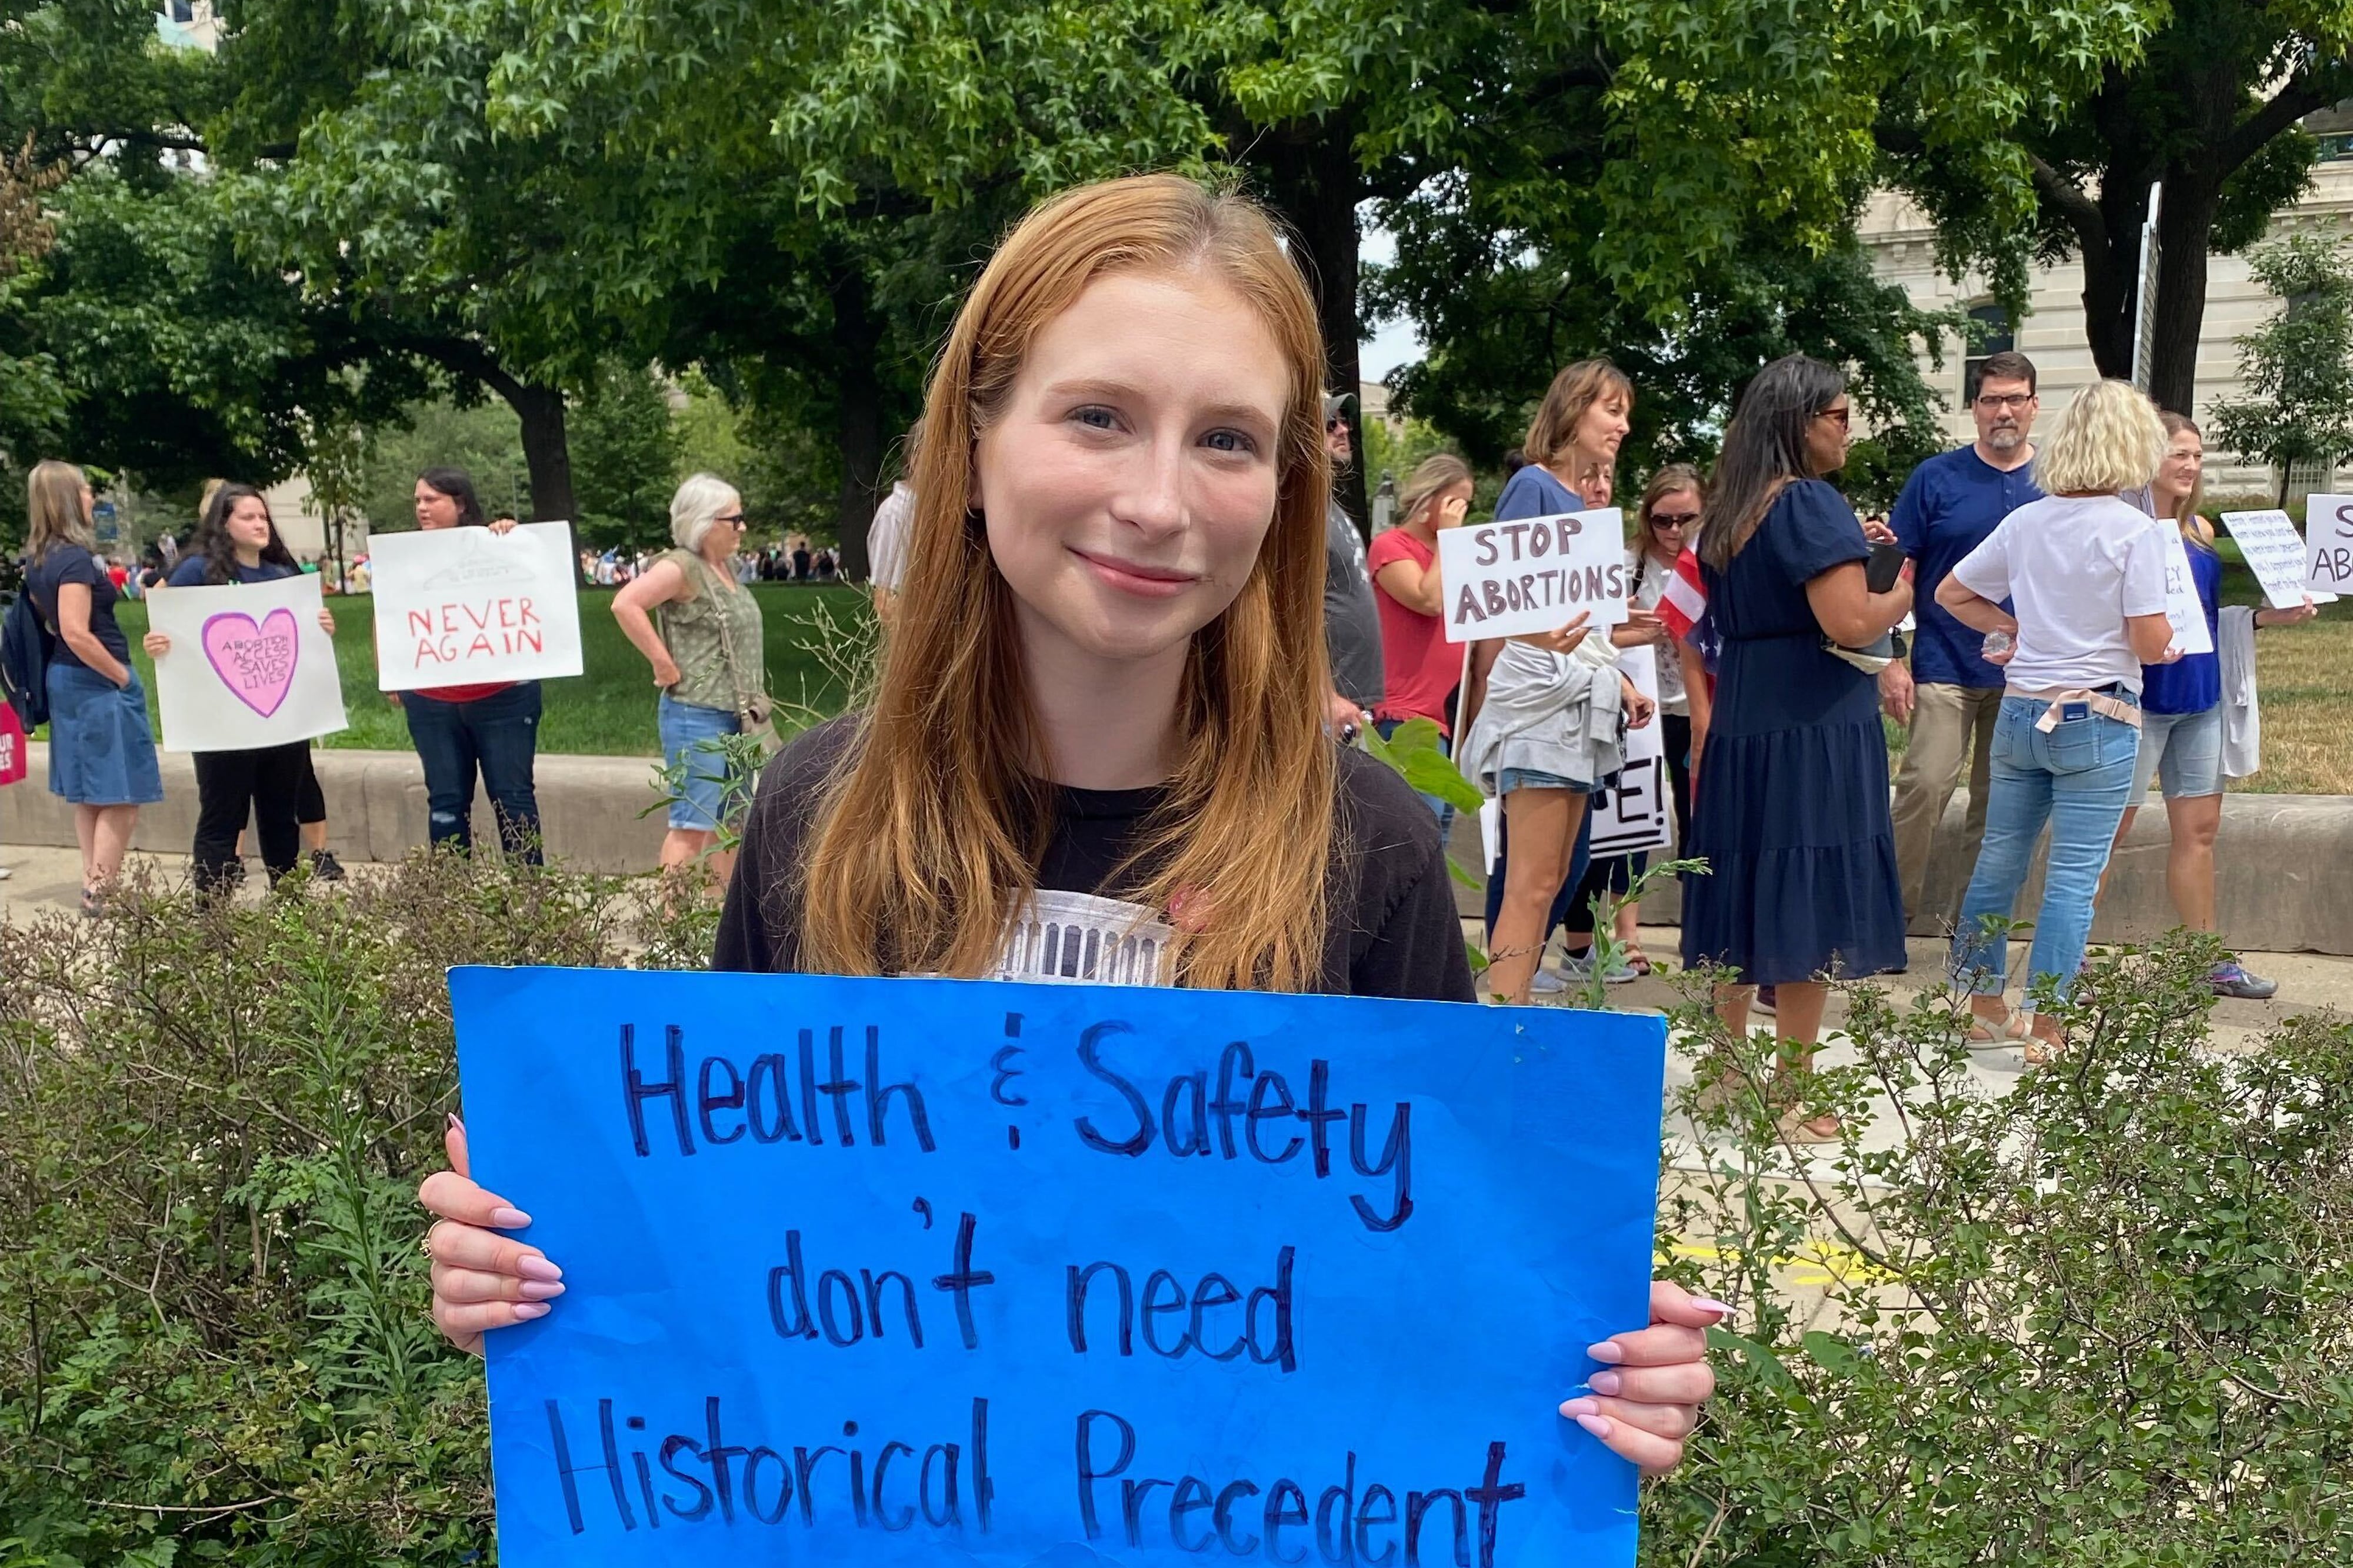 A young woman holds a blue sign and stands in front of a crowd of people holding signs. Her sign reads: “Health and safety don’t need historical precedent.”